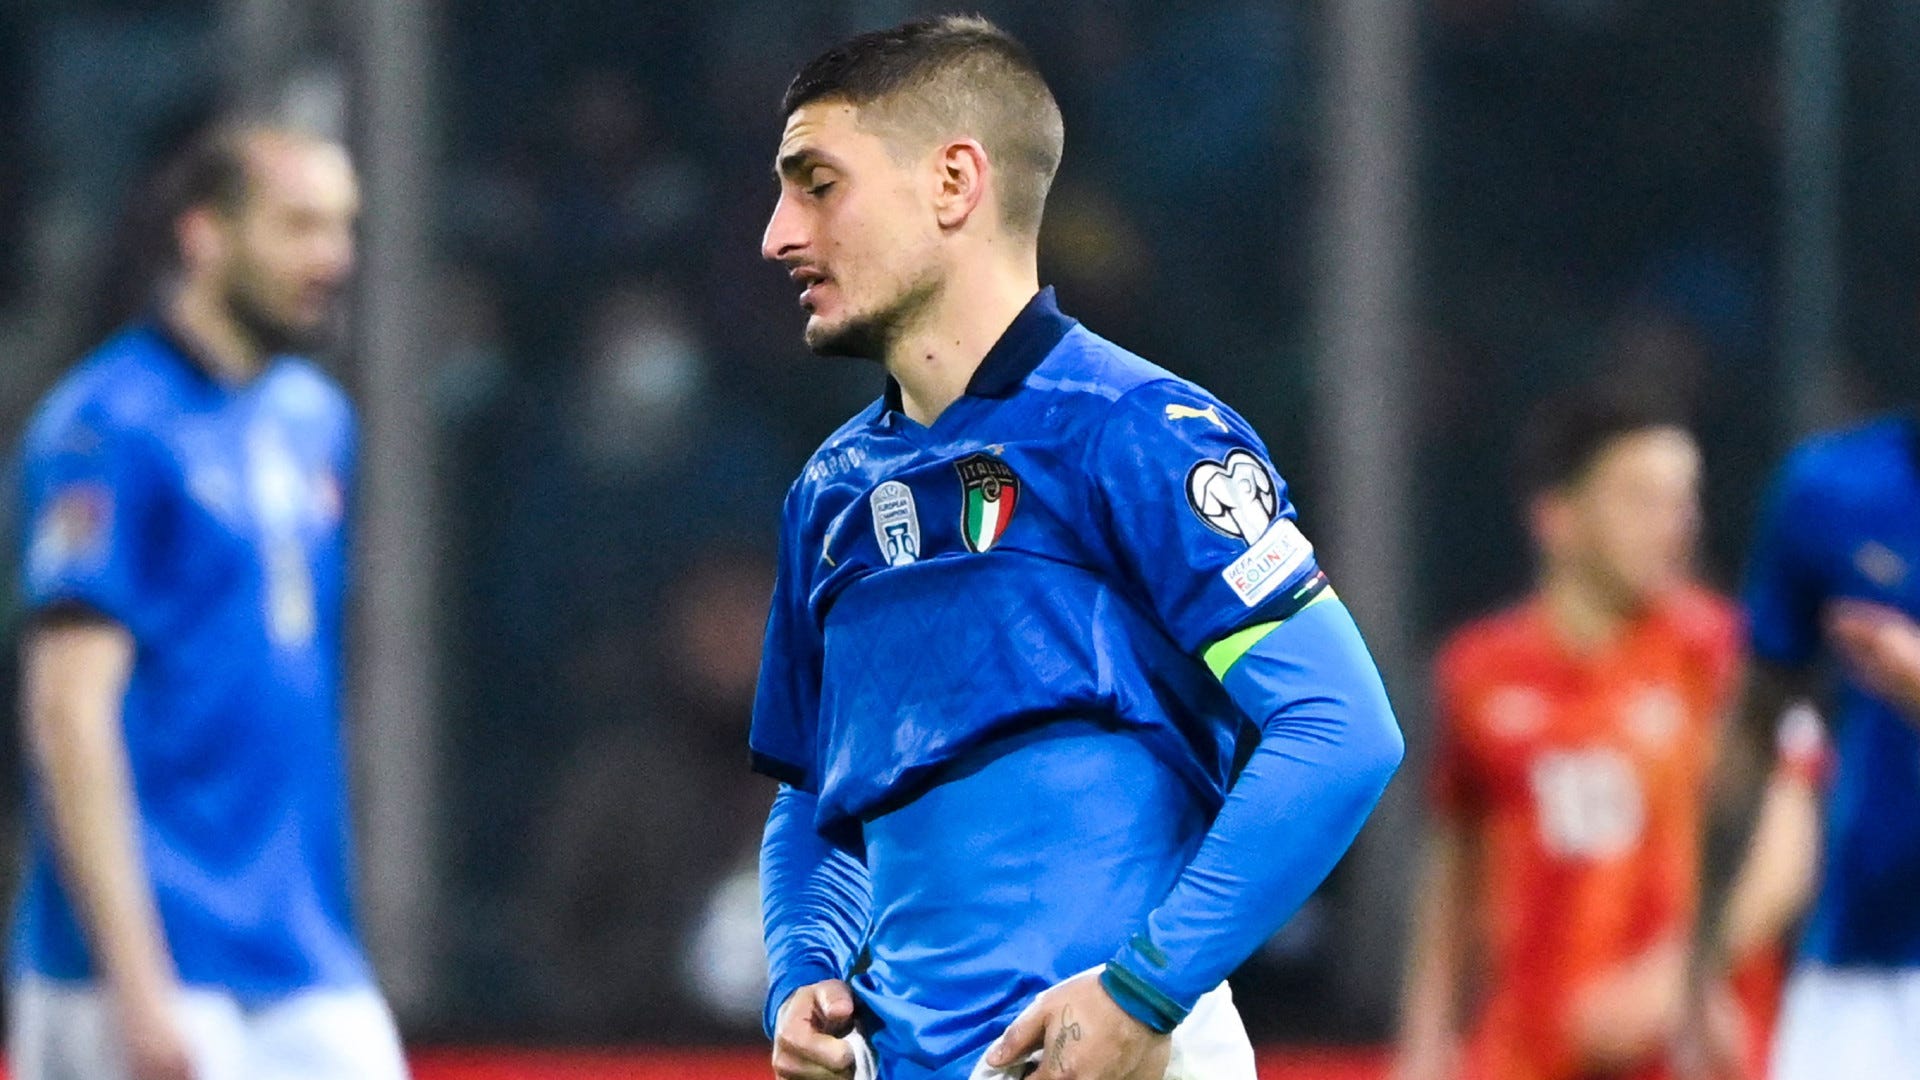 Leave younger Italy players alone' - Verratti in plea for understanding after shock World Cup qualifying exit - Goal.com